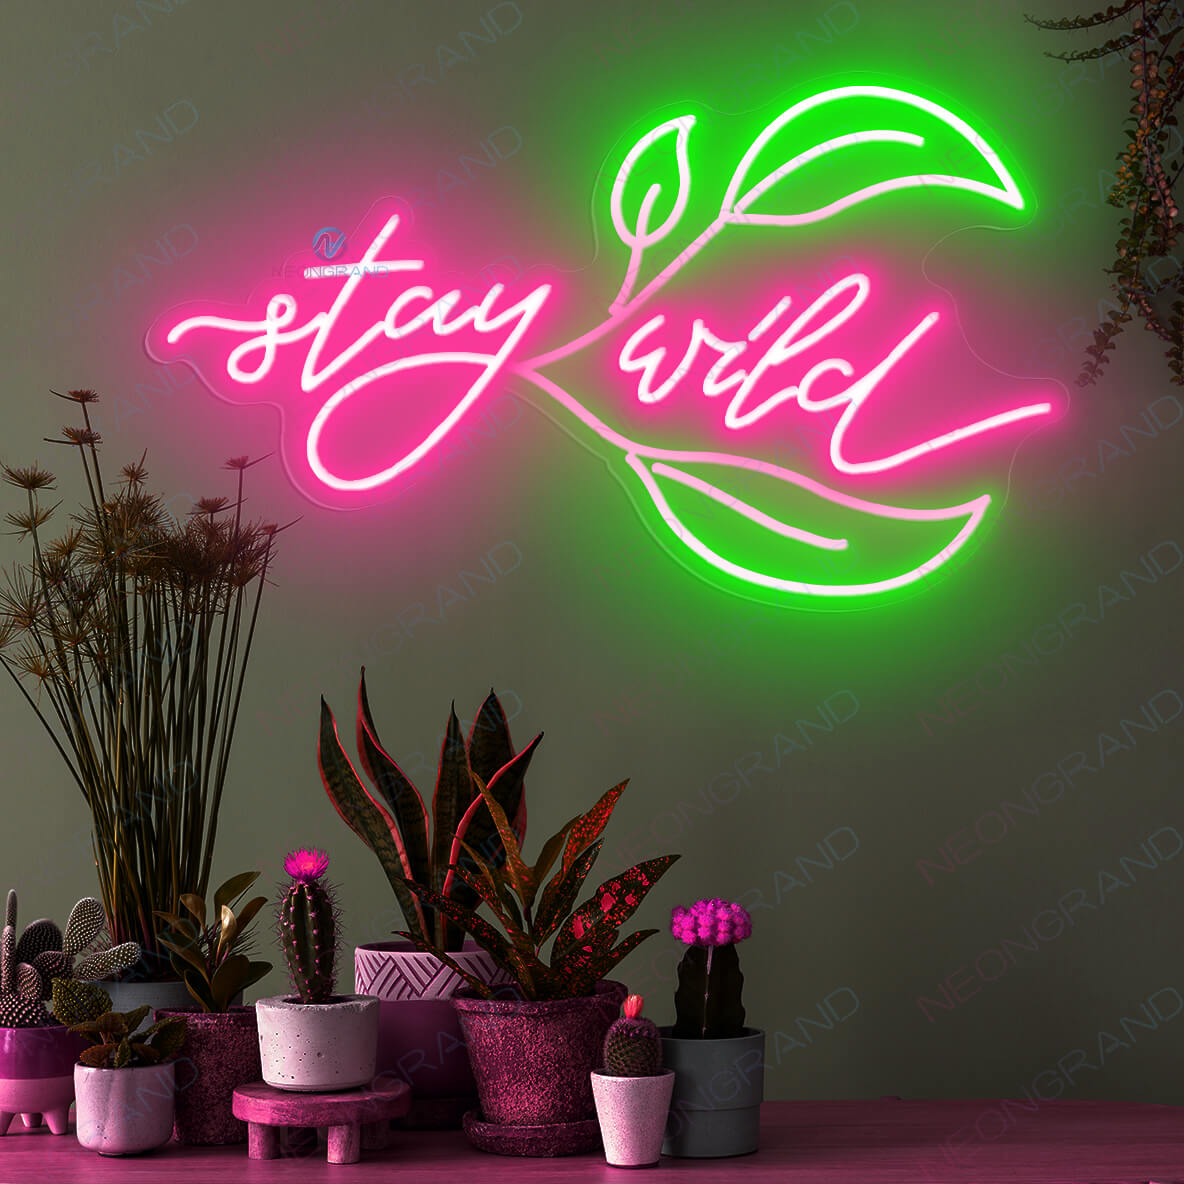 Stay Wild Neon Sign Tropical Led Light pink